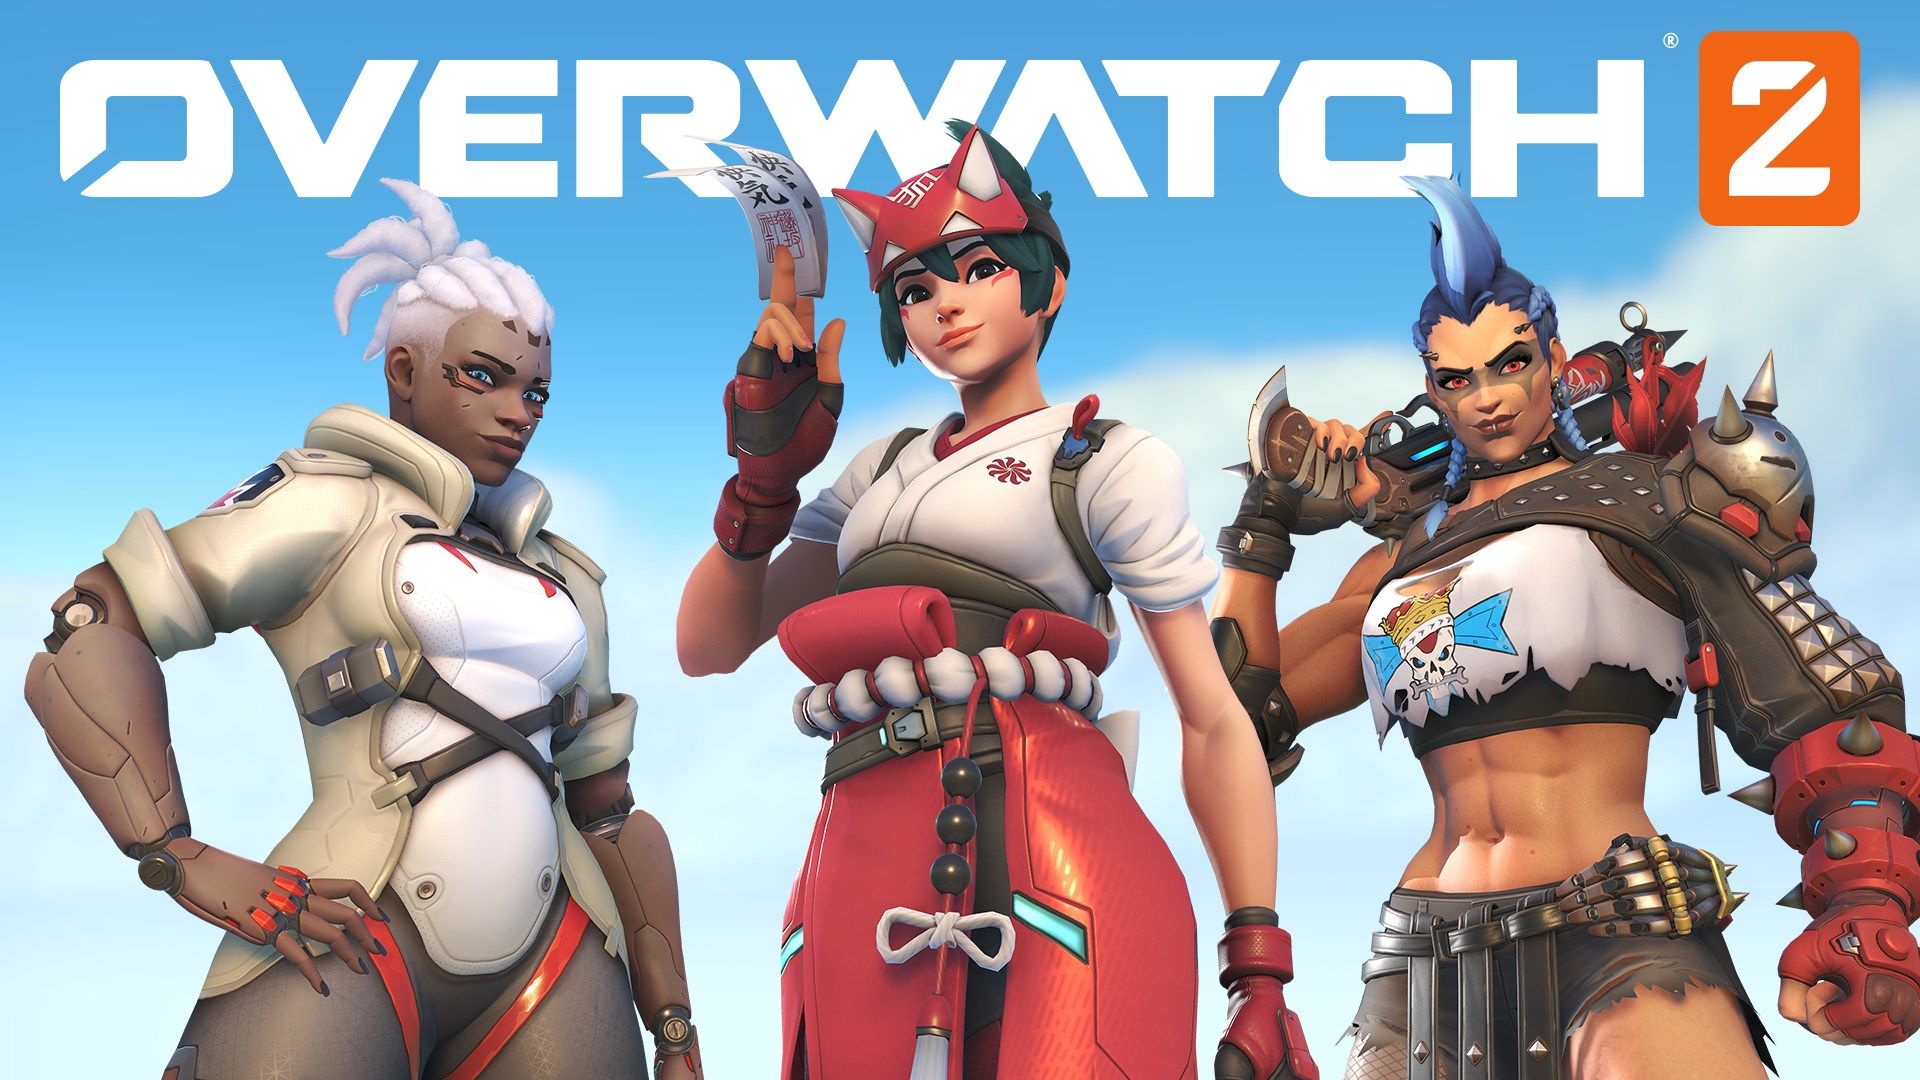 Overwatch 2 promo poster.